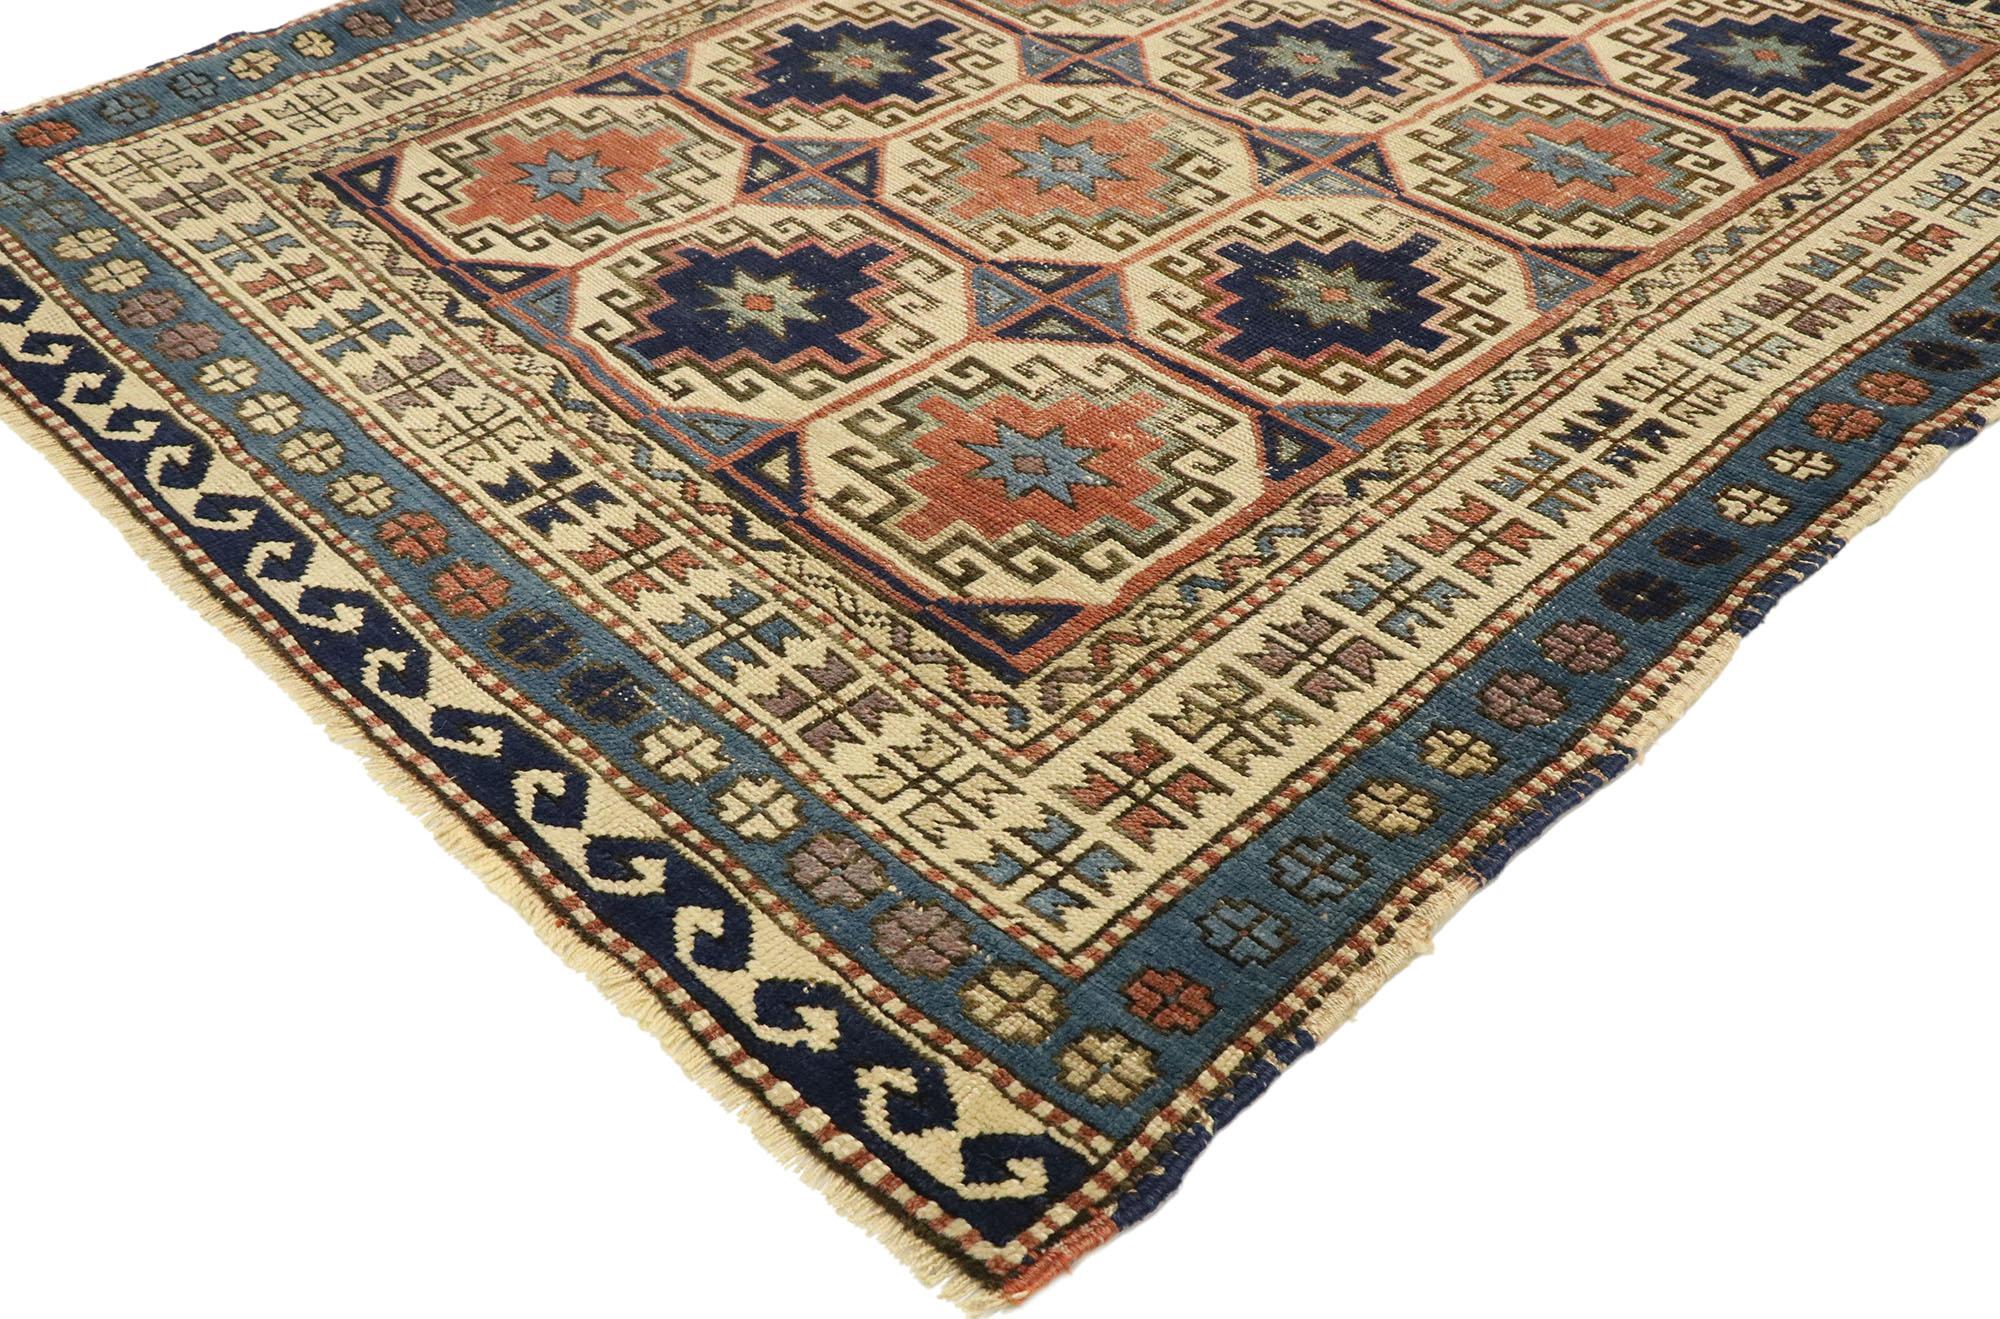 53039, distressed antique Moghan Memling Gul Kazak rug with Modern Tribal style. Displaying inimitable warmth and native charm with rustic sensibility, this hand knotted wool distressed antique Kazak square rug beautifully embodies a modern tribal